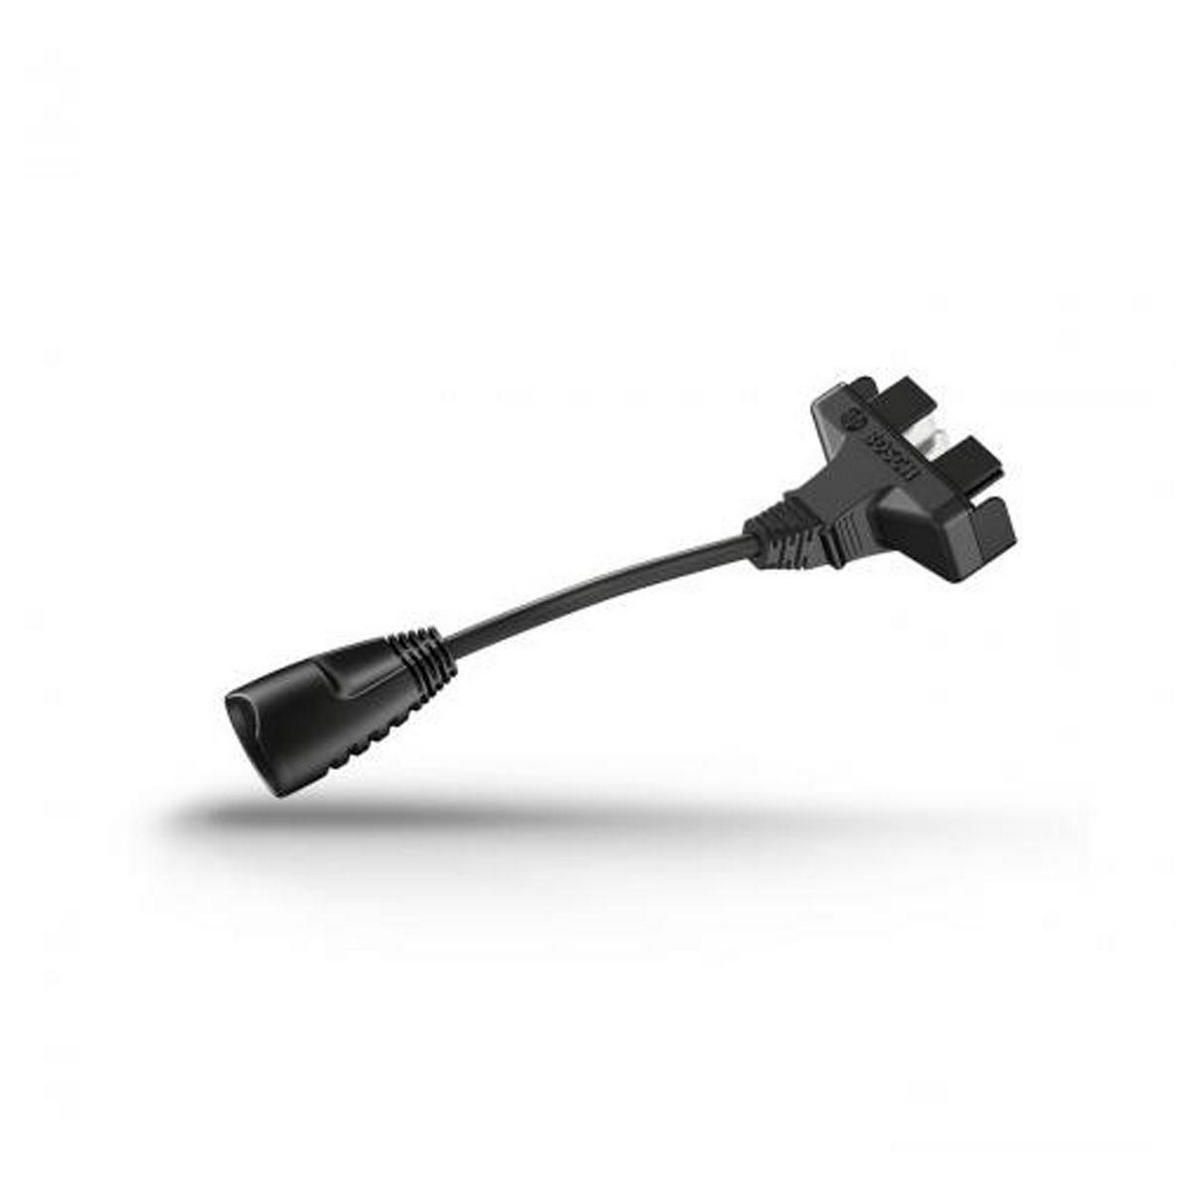 Battery adapter cable from active performance to classic+